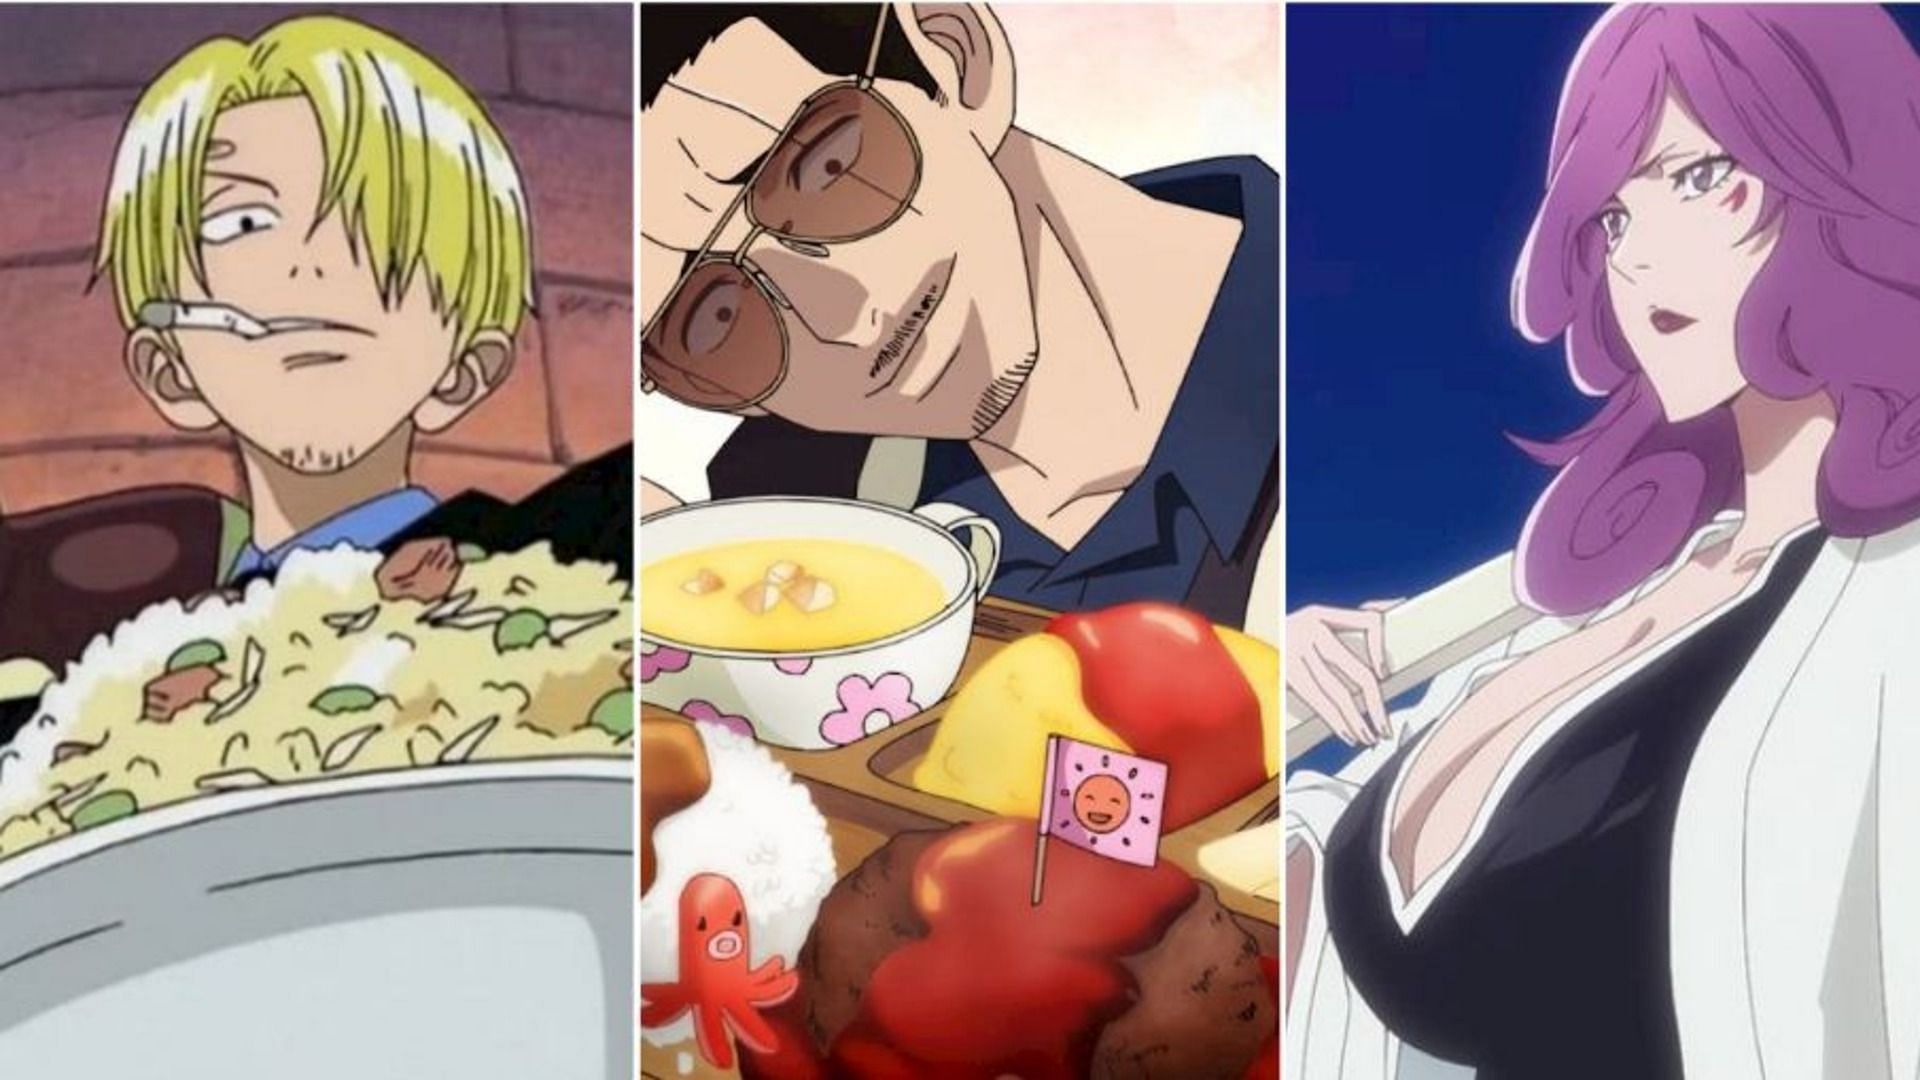 Who is the best anime Chef? - Anime Debate - Quora